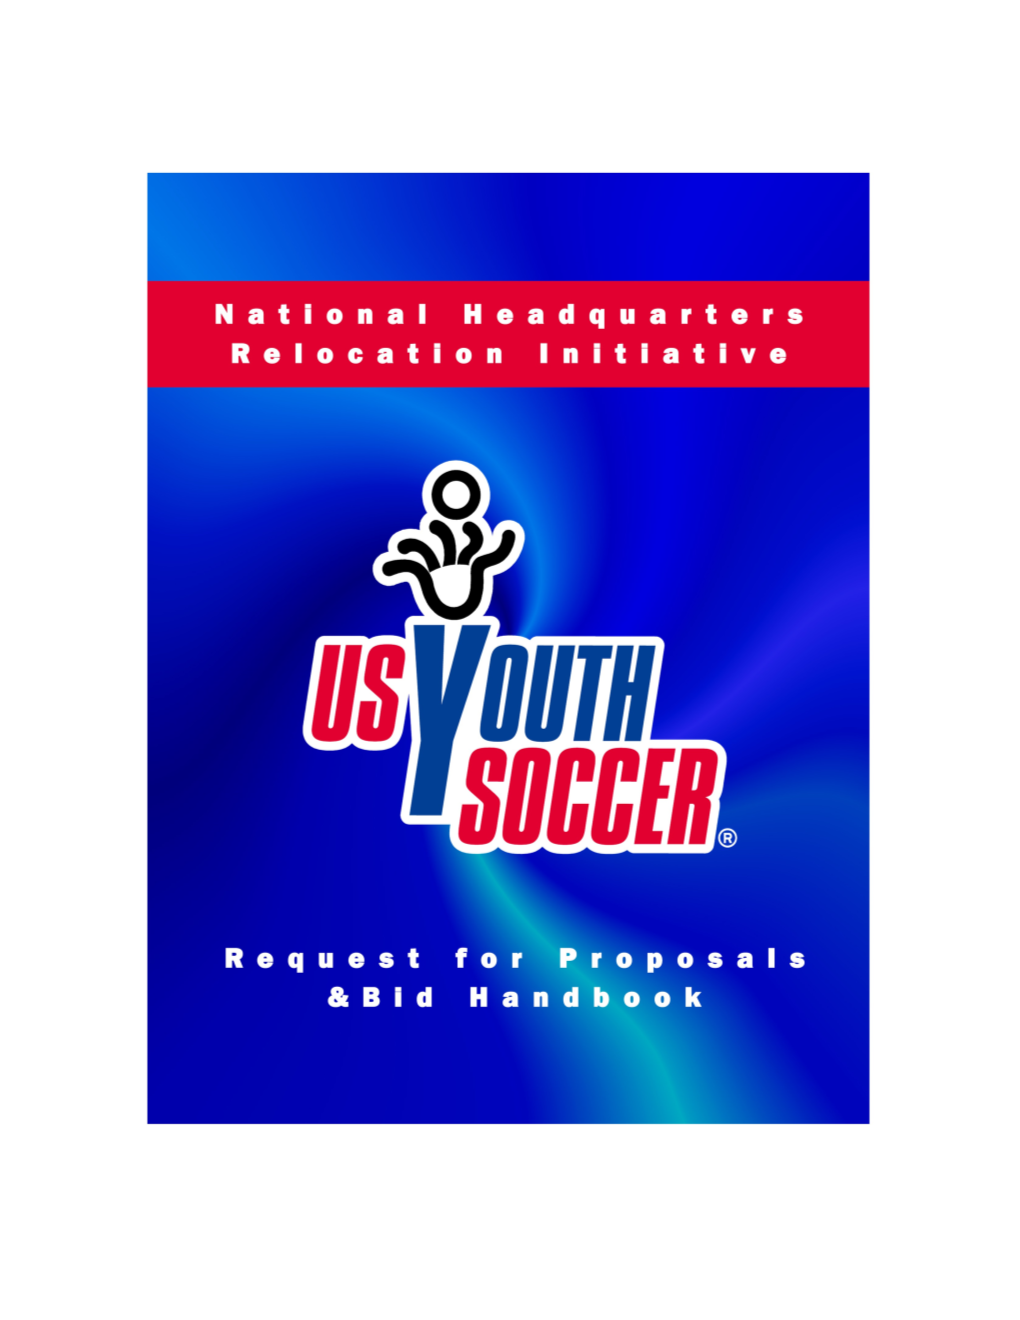 United States Youth Soccer Association